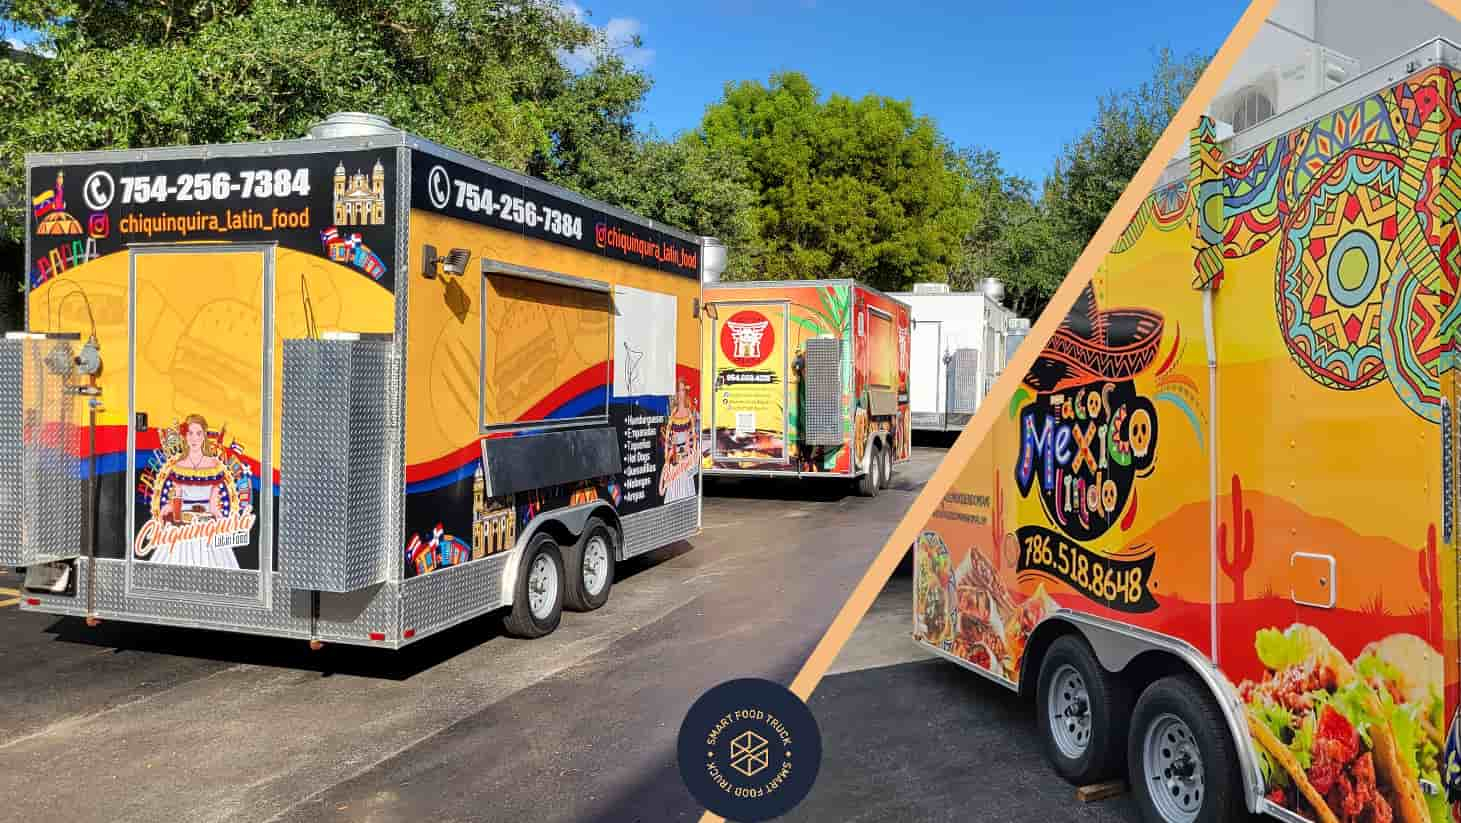 Top tips to make your food truck stand out: DESIGN A FOOD TRUCK IN MIAMI